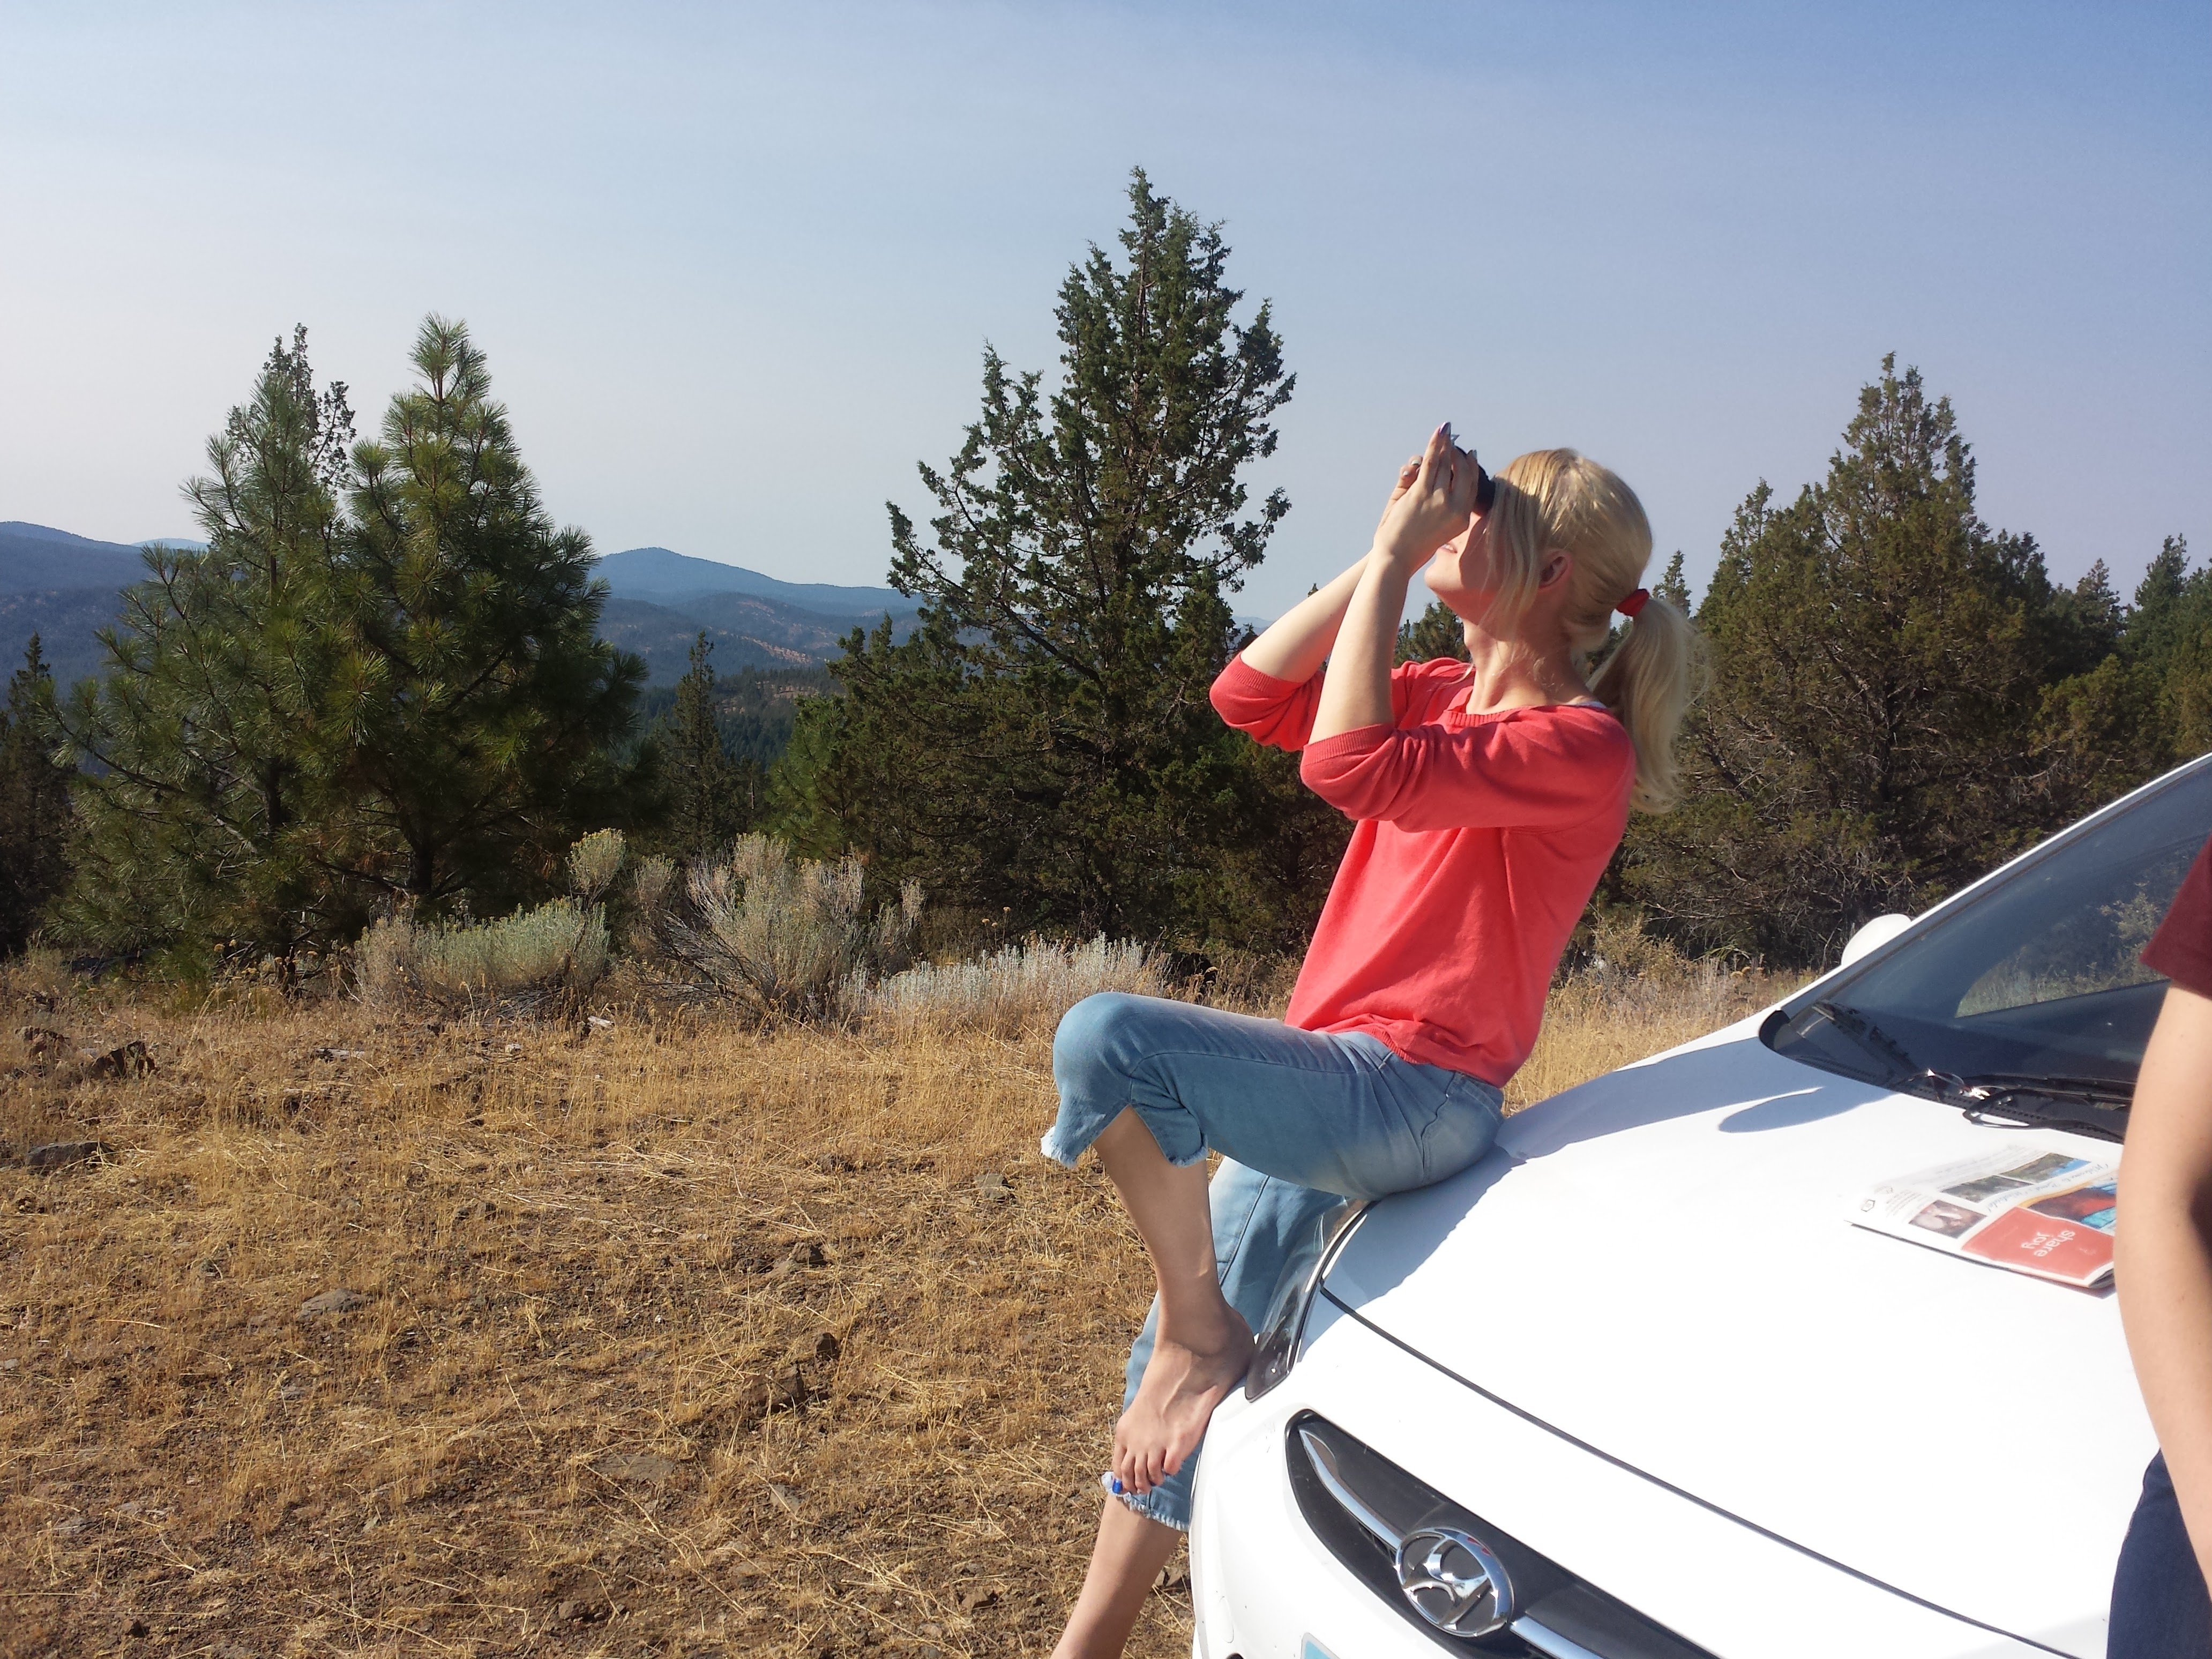 Me sitting on the hood of the pitiful rental car that was _definitely_ not meant to drive on completely un-maintained forest roads